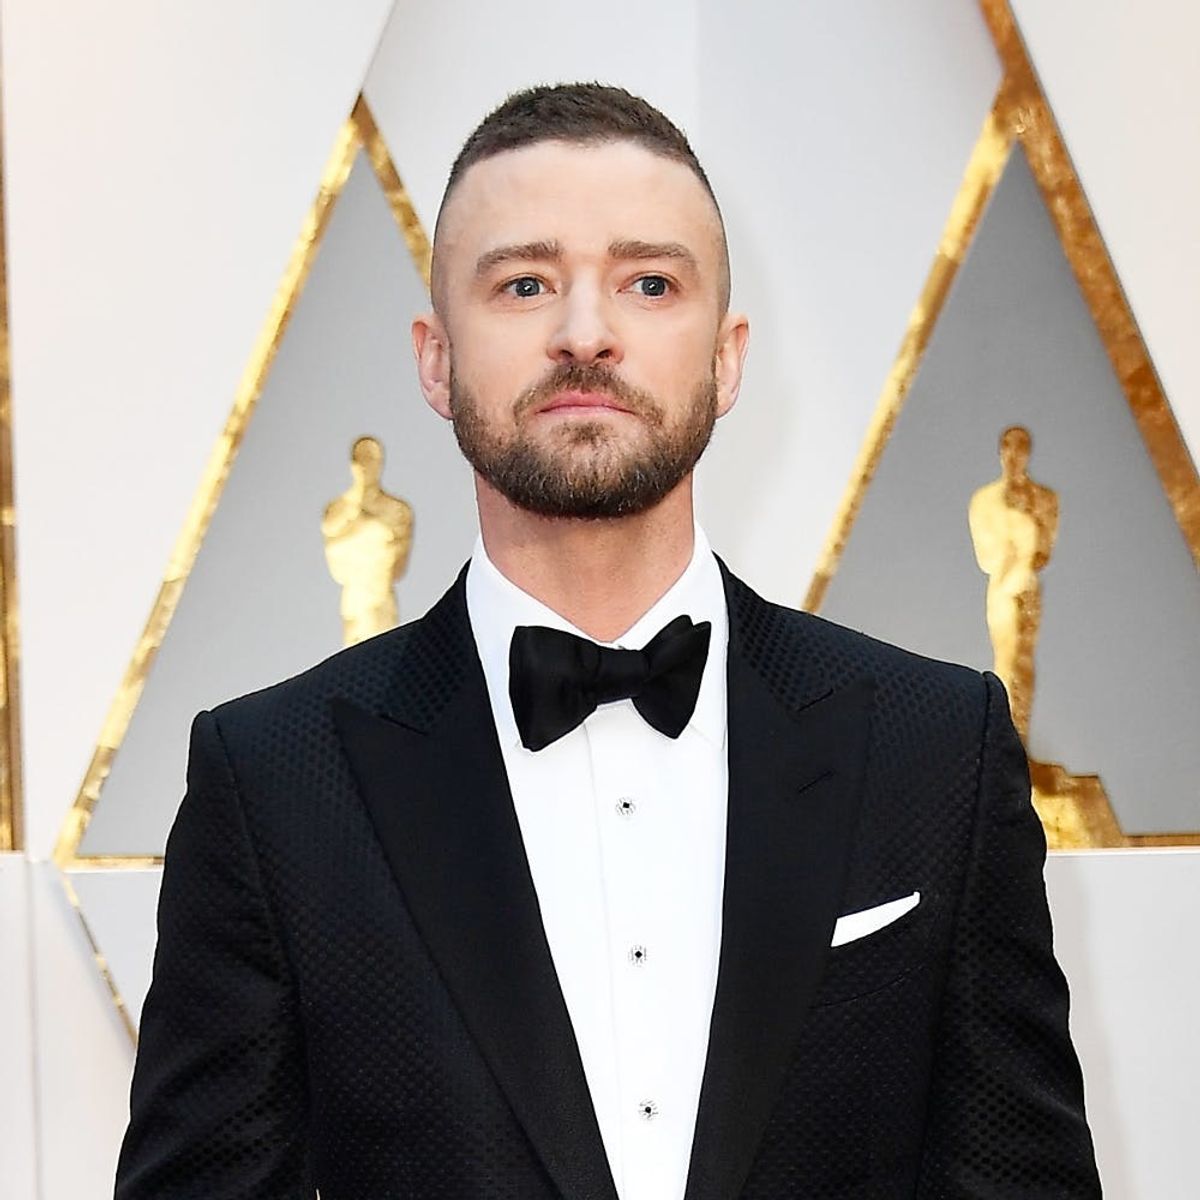 Justin Timberlake Sang to an Injured Woman Who Was Hit by a Golf Ball